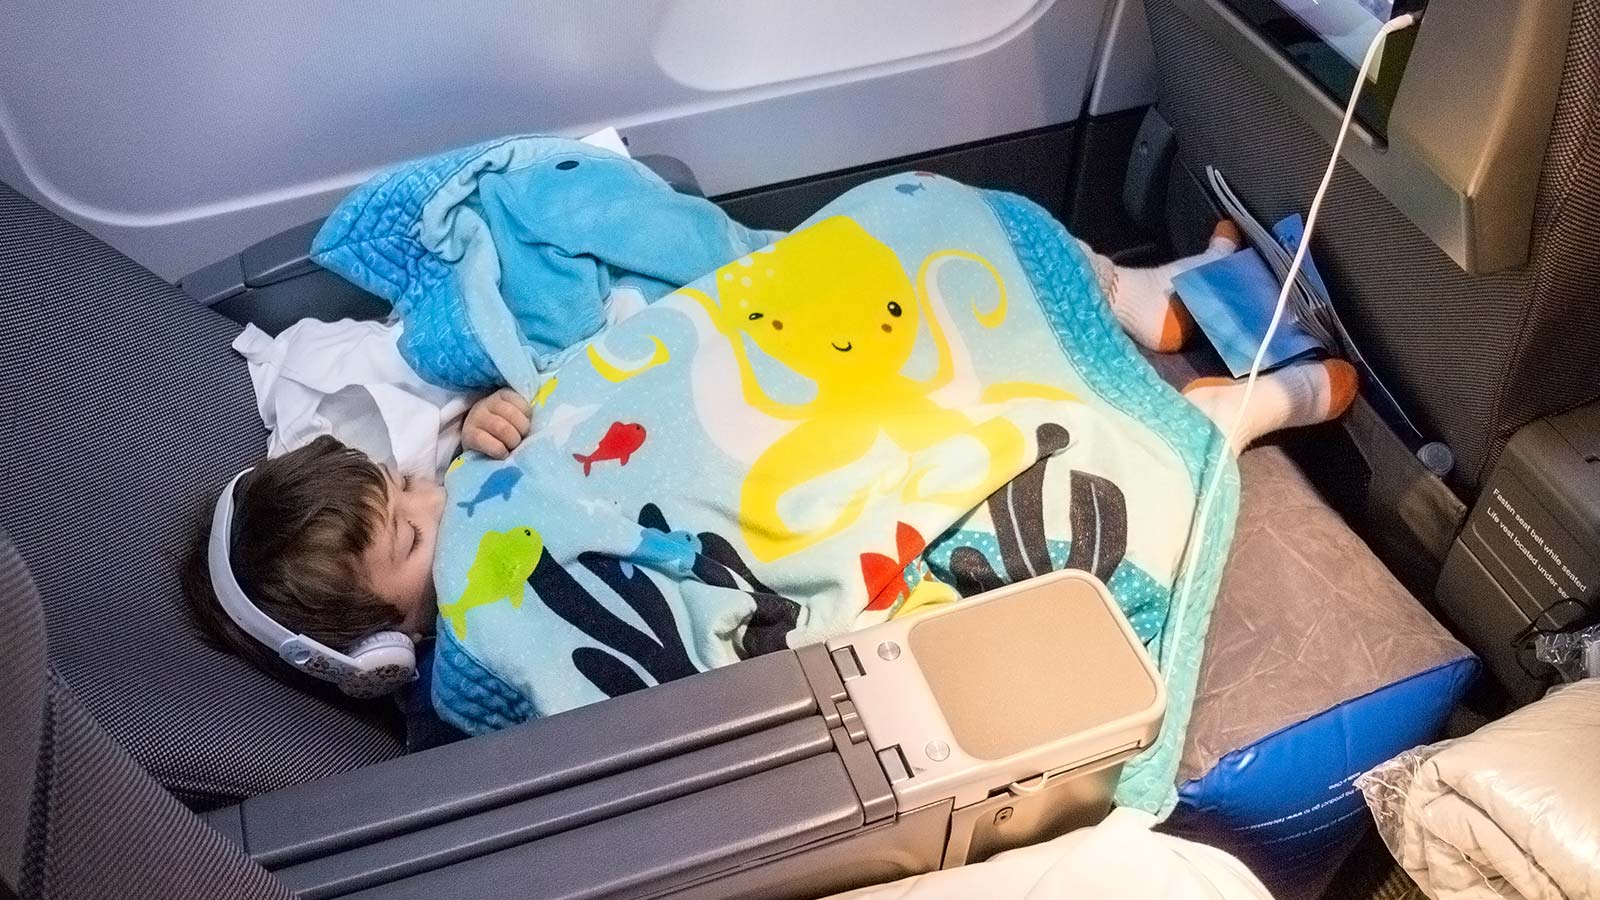 The 1st Class Kid Travel Pillow is an inflatable footrest for airplanes that fits in the space between seats in order to create a seamless reclining area for children to fly legs up. There are things that users need to know about flying with an airplane leg rest and we lay out everything we learned from our experience.